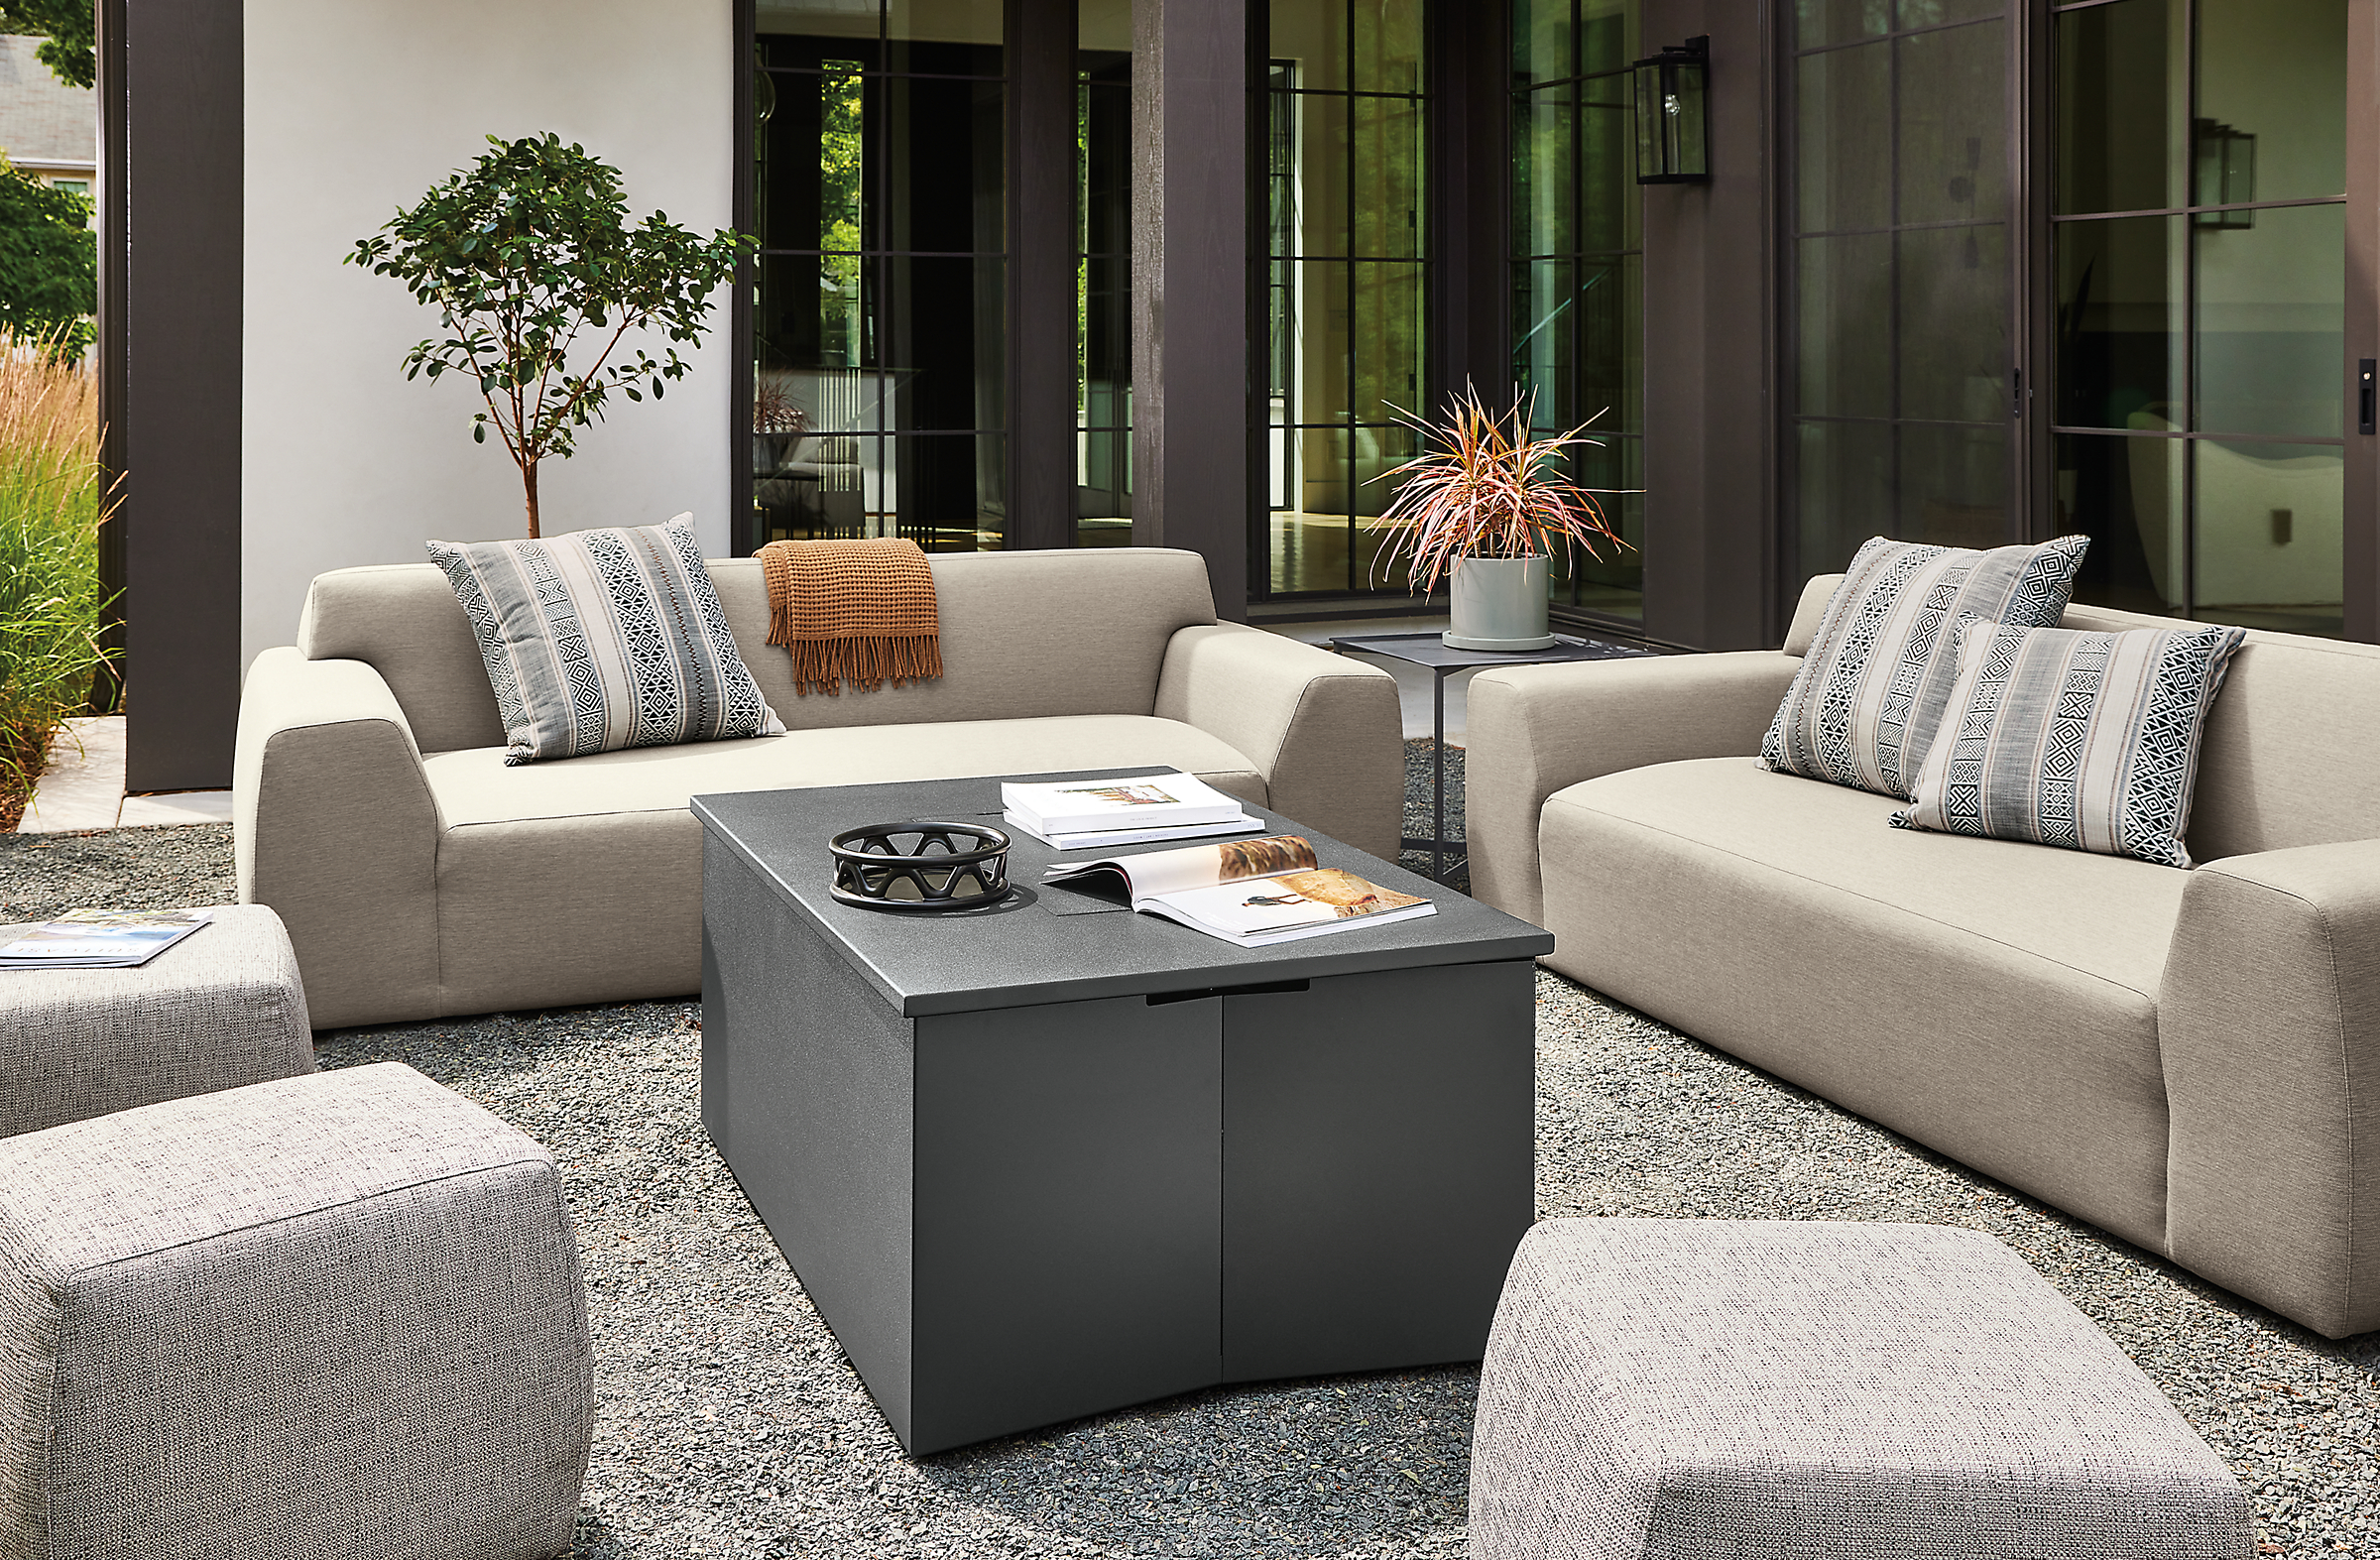 outdoor space with adara fire table, drift sofas, boyd ottoman.